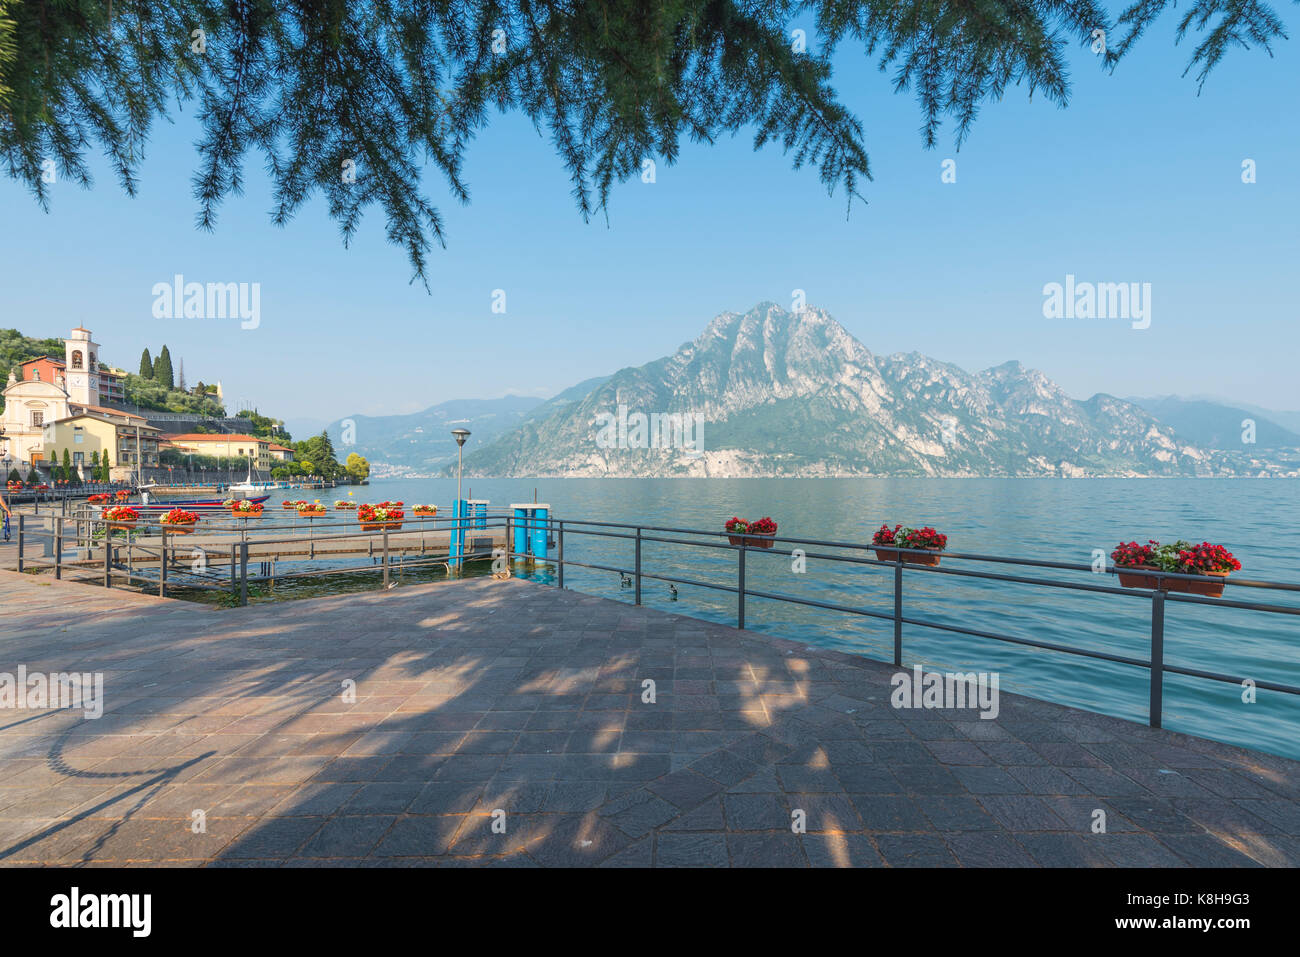 View from the lakeside at central square in medieval Riva di Solto on mountains in the evening sun at Lake Iseo, Lombardy, Italy Stock Photo